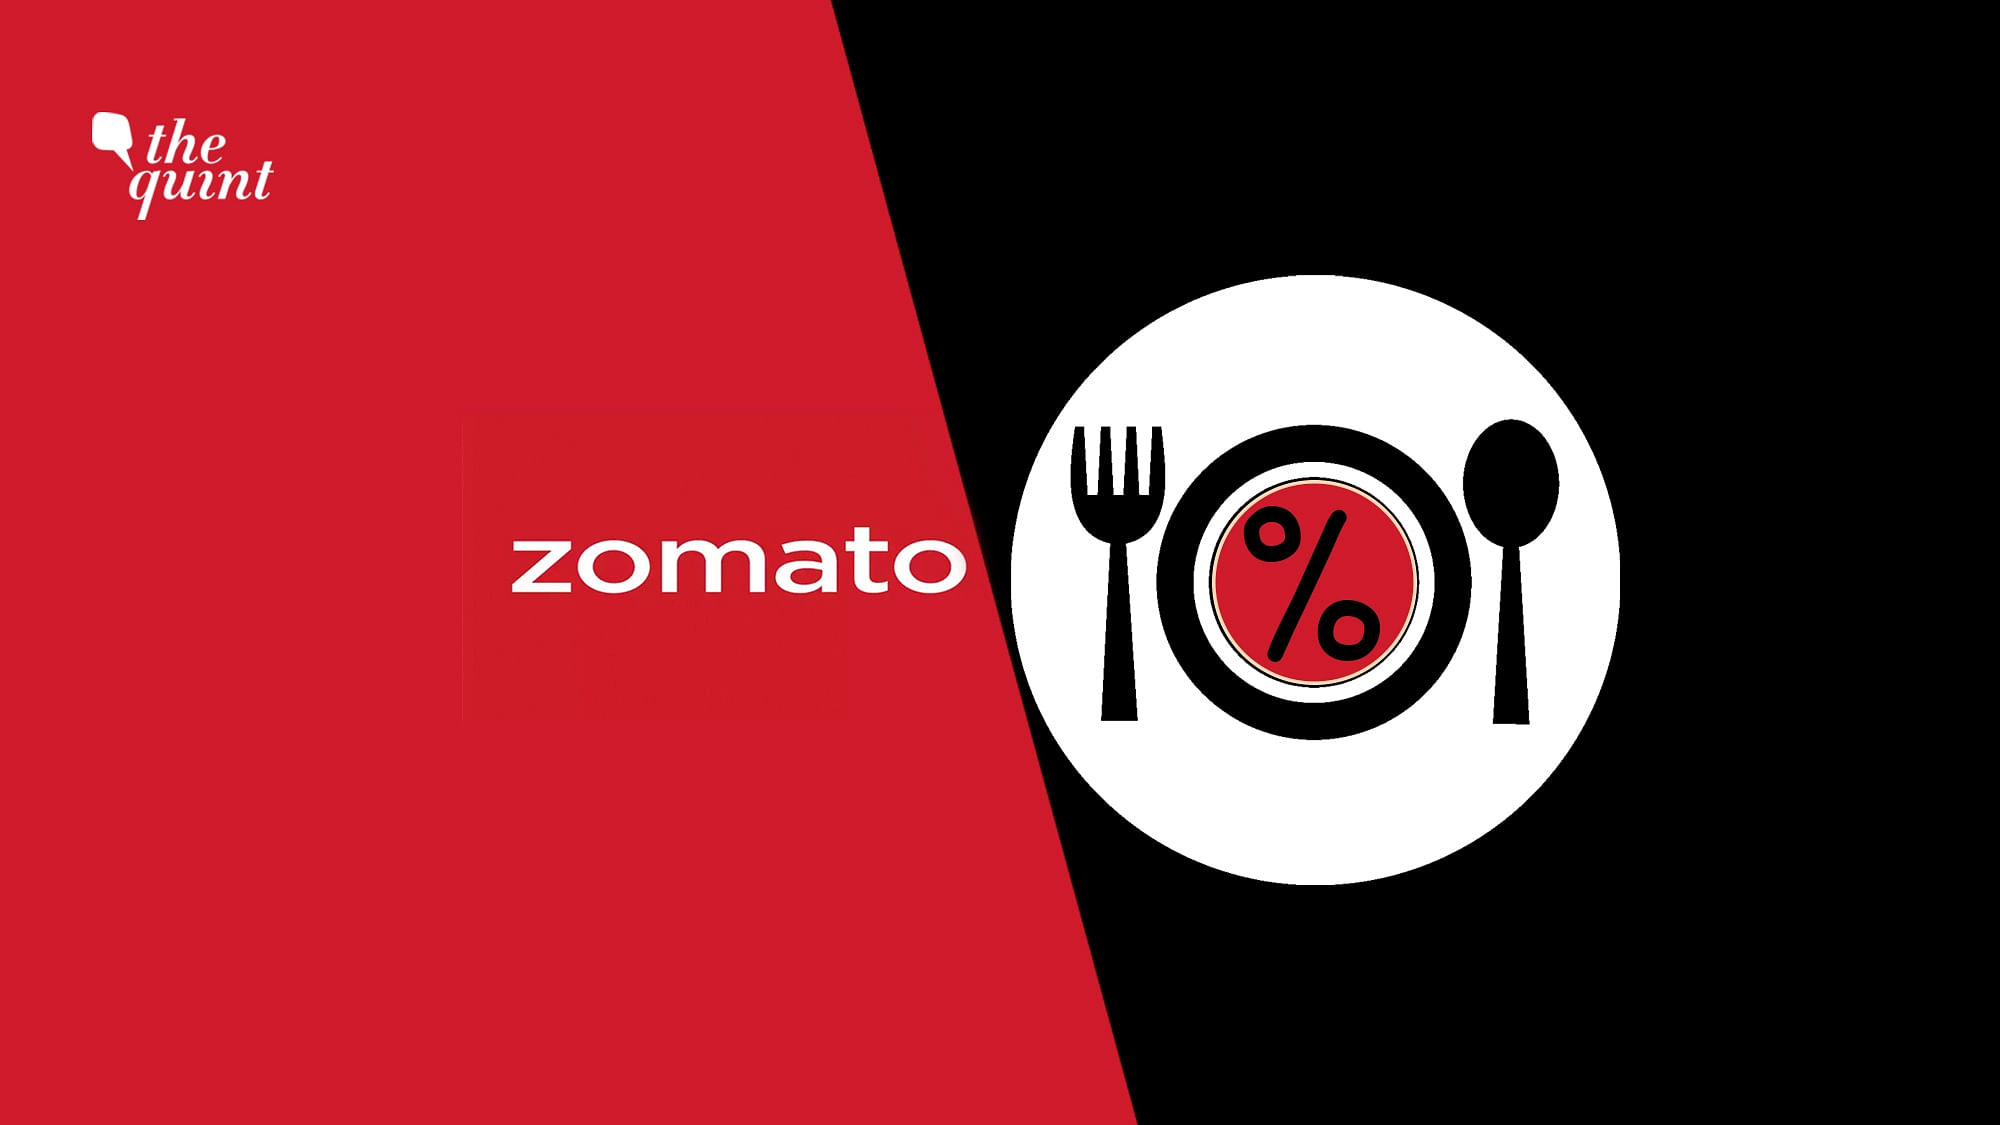 The reason behind the move is an improved Zomato platform with Artificial Intelligence-driven bots and automation for resolving customer queries.